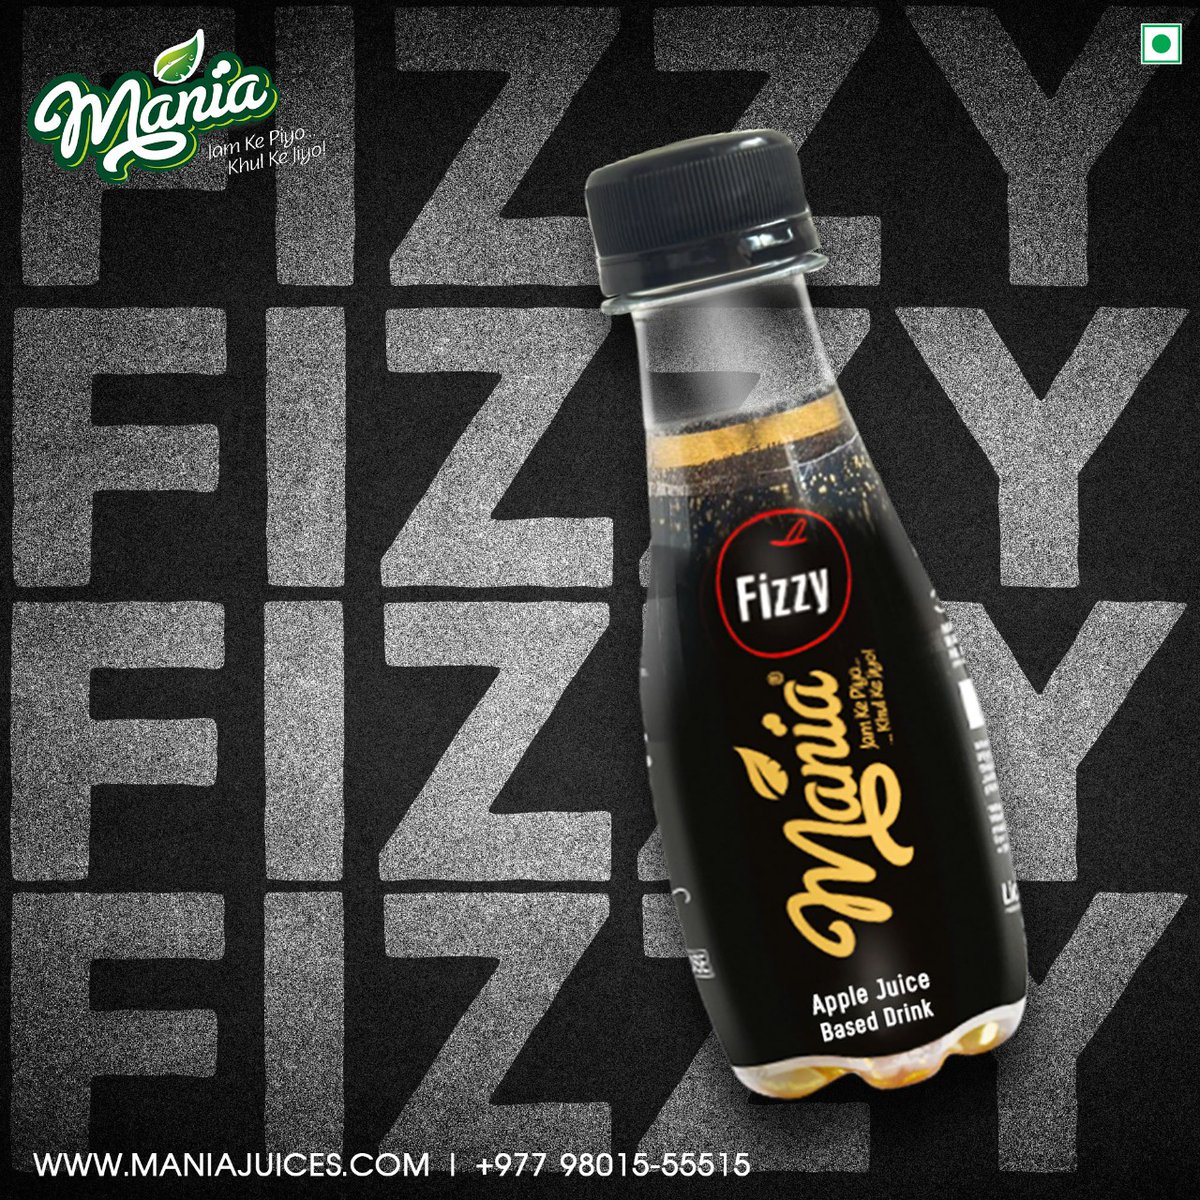 #ManiaNepal #EnergyDrink 
Mania For The Fizzy Moments Of Life.
.
.
For business, queries call - +977 980-1555515
.
#mania #rush #maniaenergydrink #fizzy #appledrink #trueenergy #evilenergy #happiness #manianepal #energydrink #friends #nepal
maniajuices.com